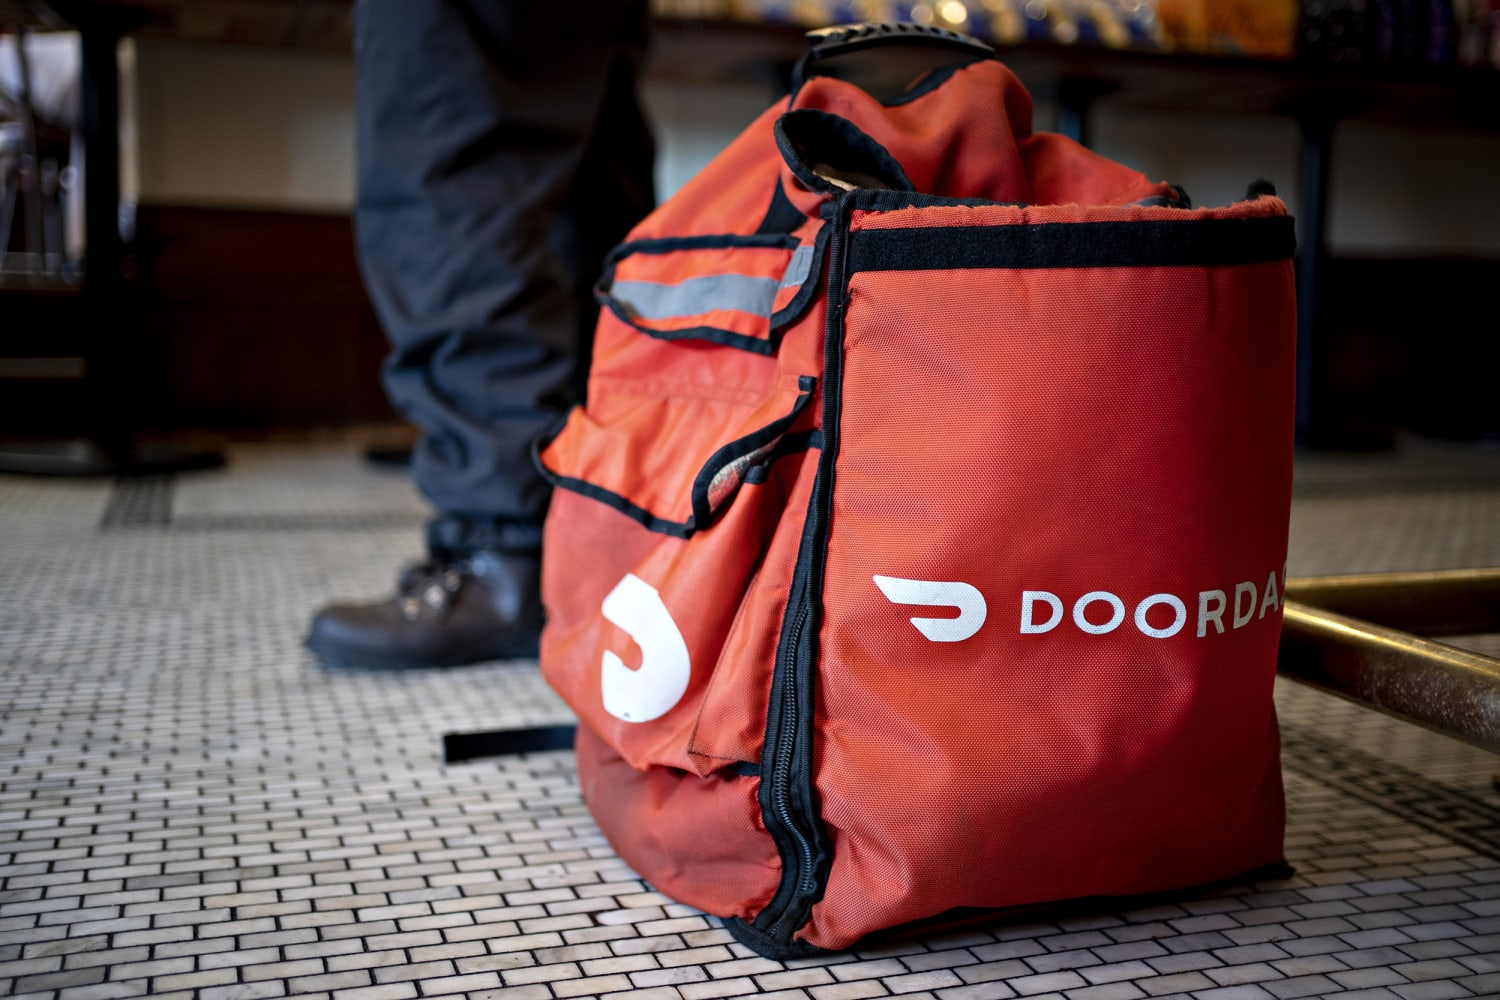 Beyond the Dash: Spotlight on the Passions of DoorDash Delivery Drivers